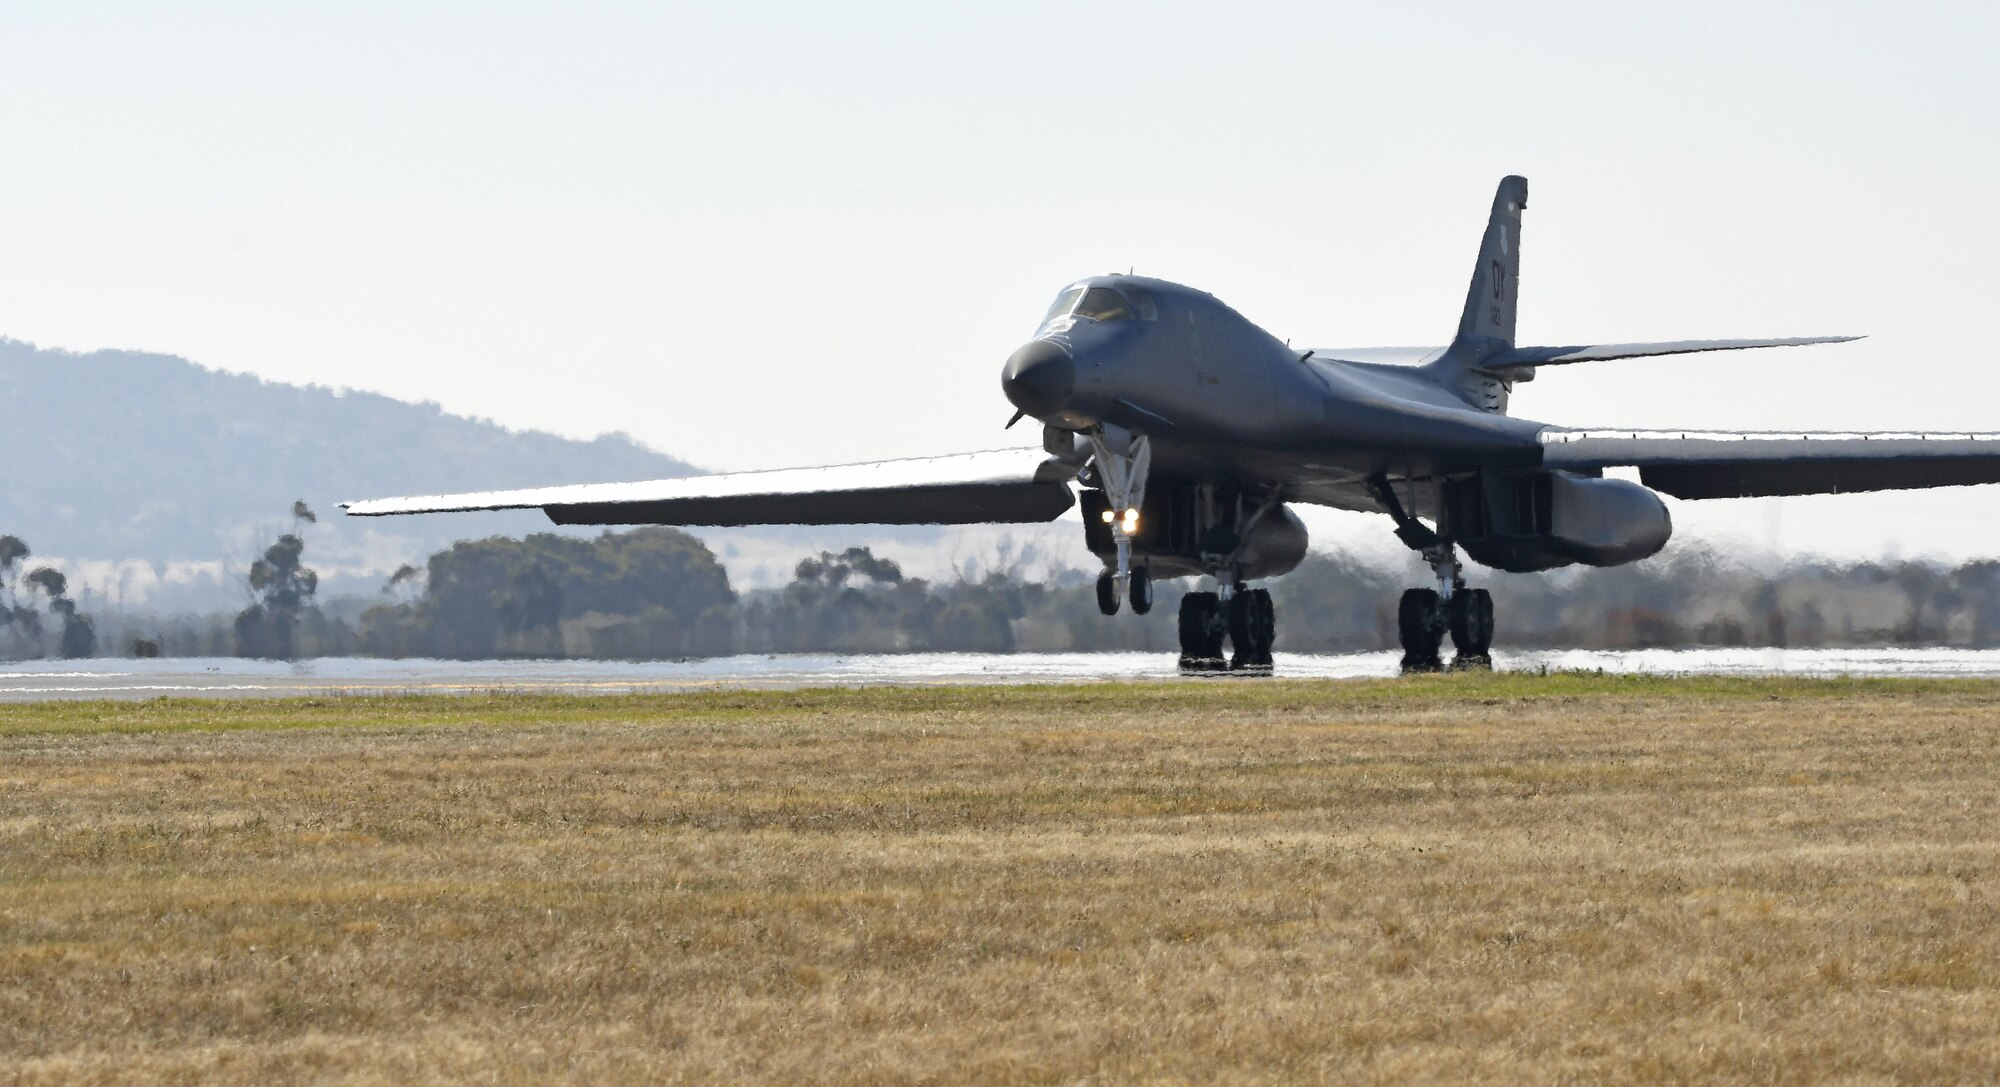 A U.S. Air Force B-1B Lancer bomber aircraft lands at Avalon Airport, Geelong, Australia, March 1, 2017. The B-1B is participating in the Australian International Airshow and Aerospace & Defence Exposition (AVALON), the largest, most comprehensive aerial event of its kind in the Southern Hemisphere. While at AVALON, the B-1B will be on static display for airshow participants. This is the first time B-1s have landed in Australia while deployed in support of U.S. Pacific Command’s Continuous Bomber Presence mission. The U.S. conducts CBP operations routinely by forward deploying bombers into the region as a deterrence capability supporting security and allies and partners in the Indo-Asia-Pacific. Bombers and aircrew commonly participate in combined exercises and operations during CBP deployments. AVALON 2017 provided an ideal forum for the U.S. to showcase the B-1B’s capabilities to our allies, partners and citizens of the Pacific. (U.S. Air Force photo by Master Sgt. John Gordinier)